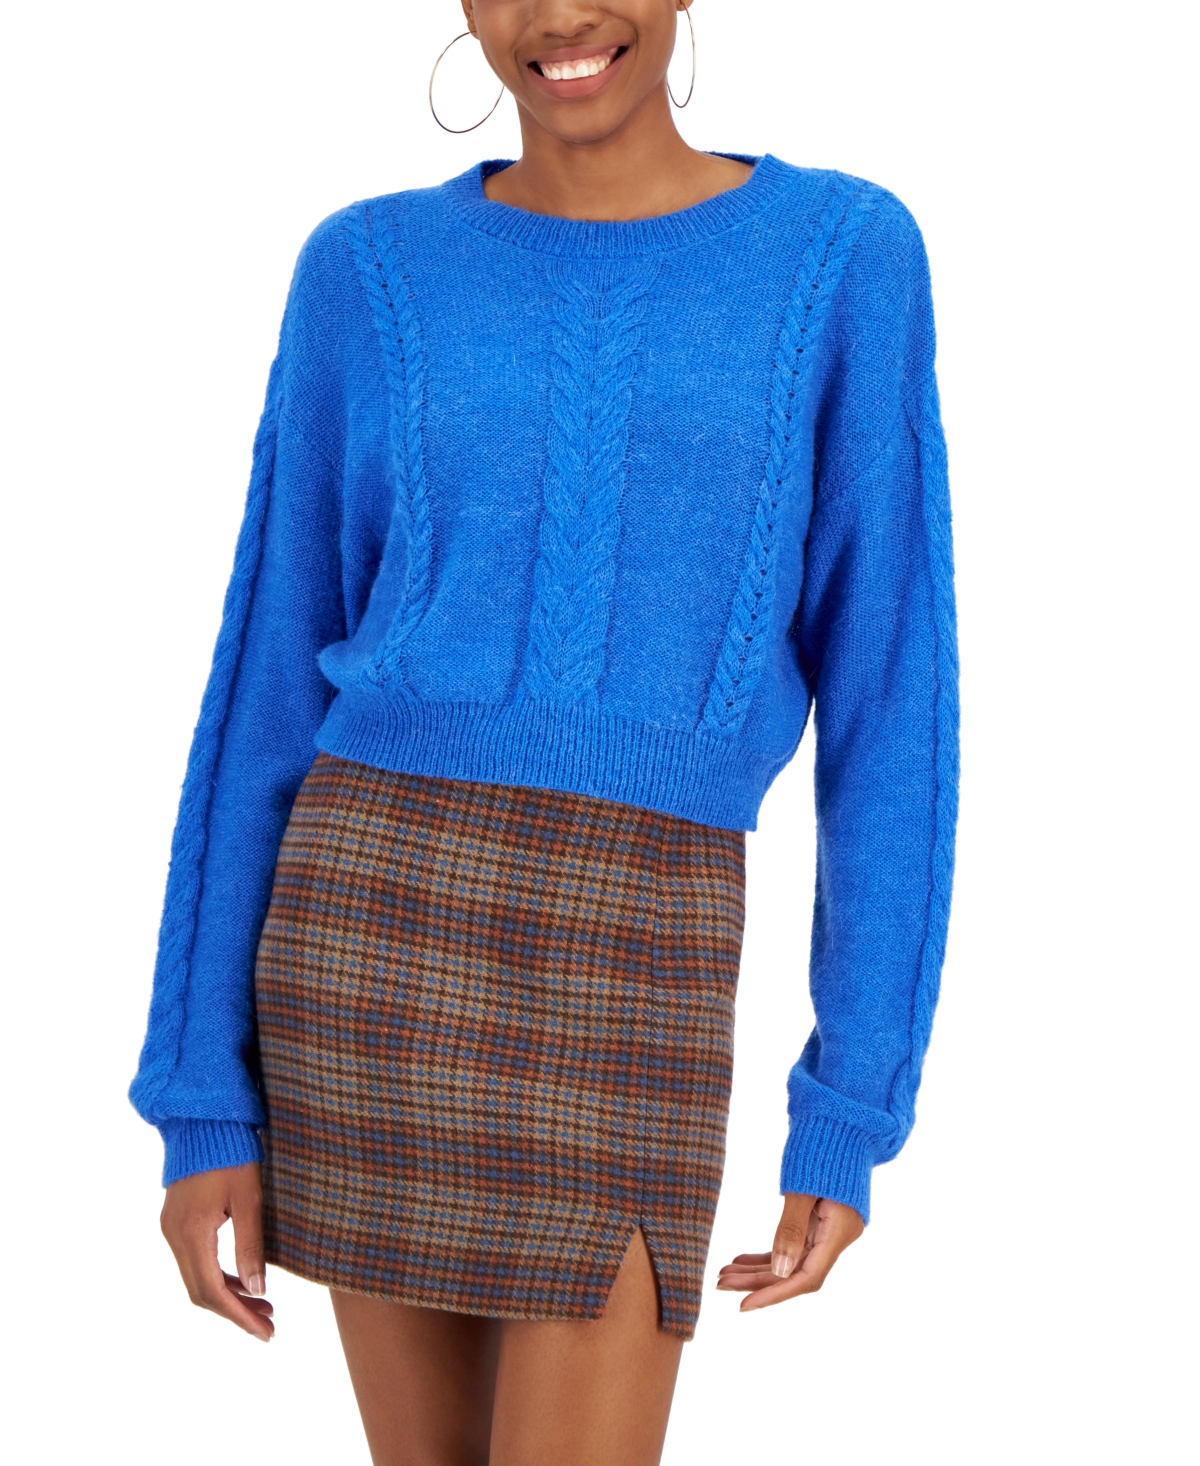 Women's Scott Twisted Cable-Knit Sweater - Blue